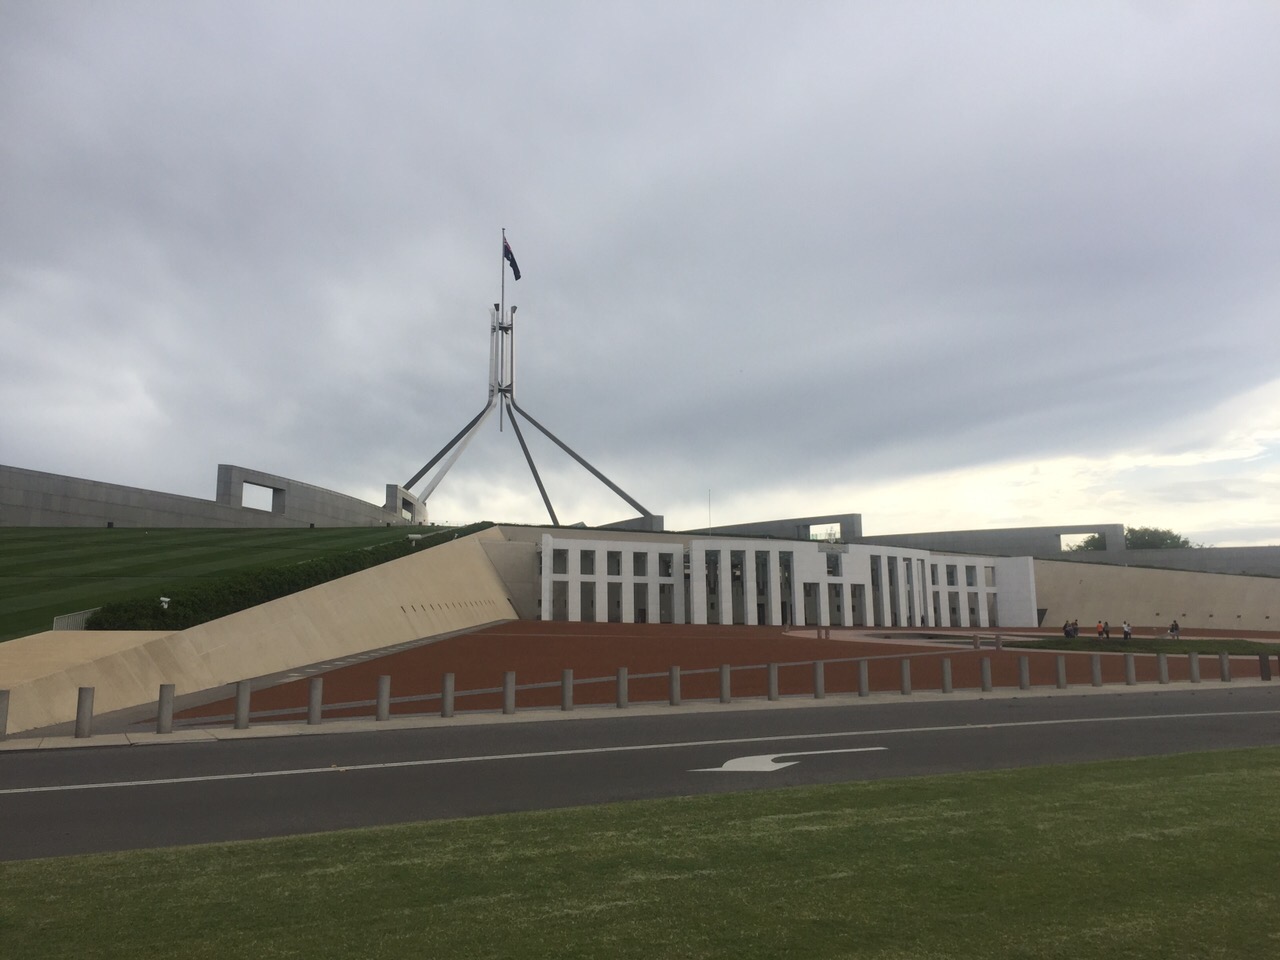 parliament-house-side-view-canberra-government-australia.jpg